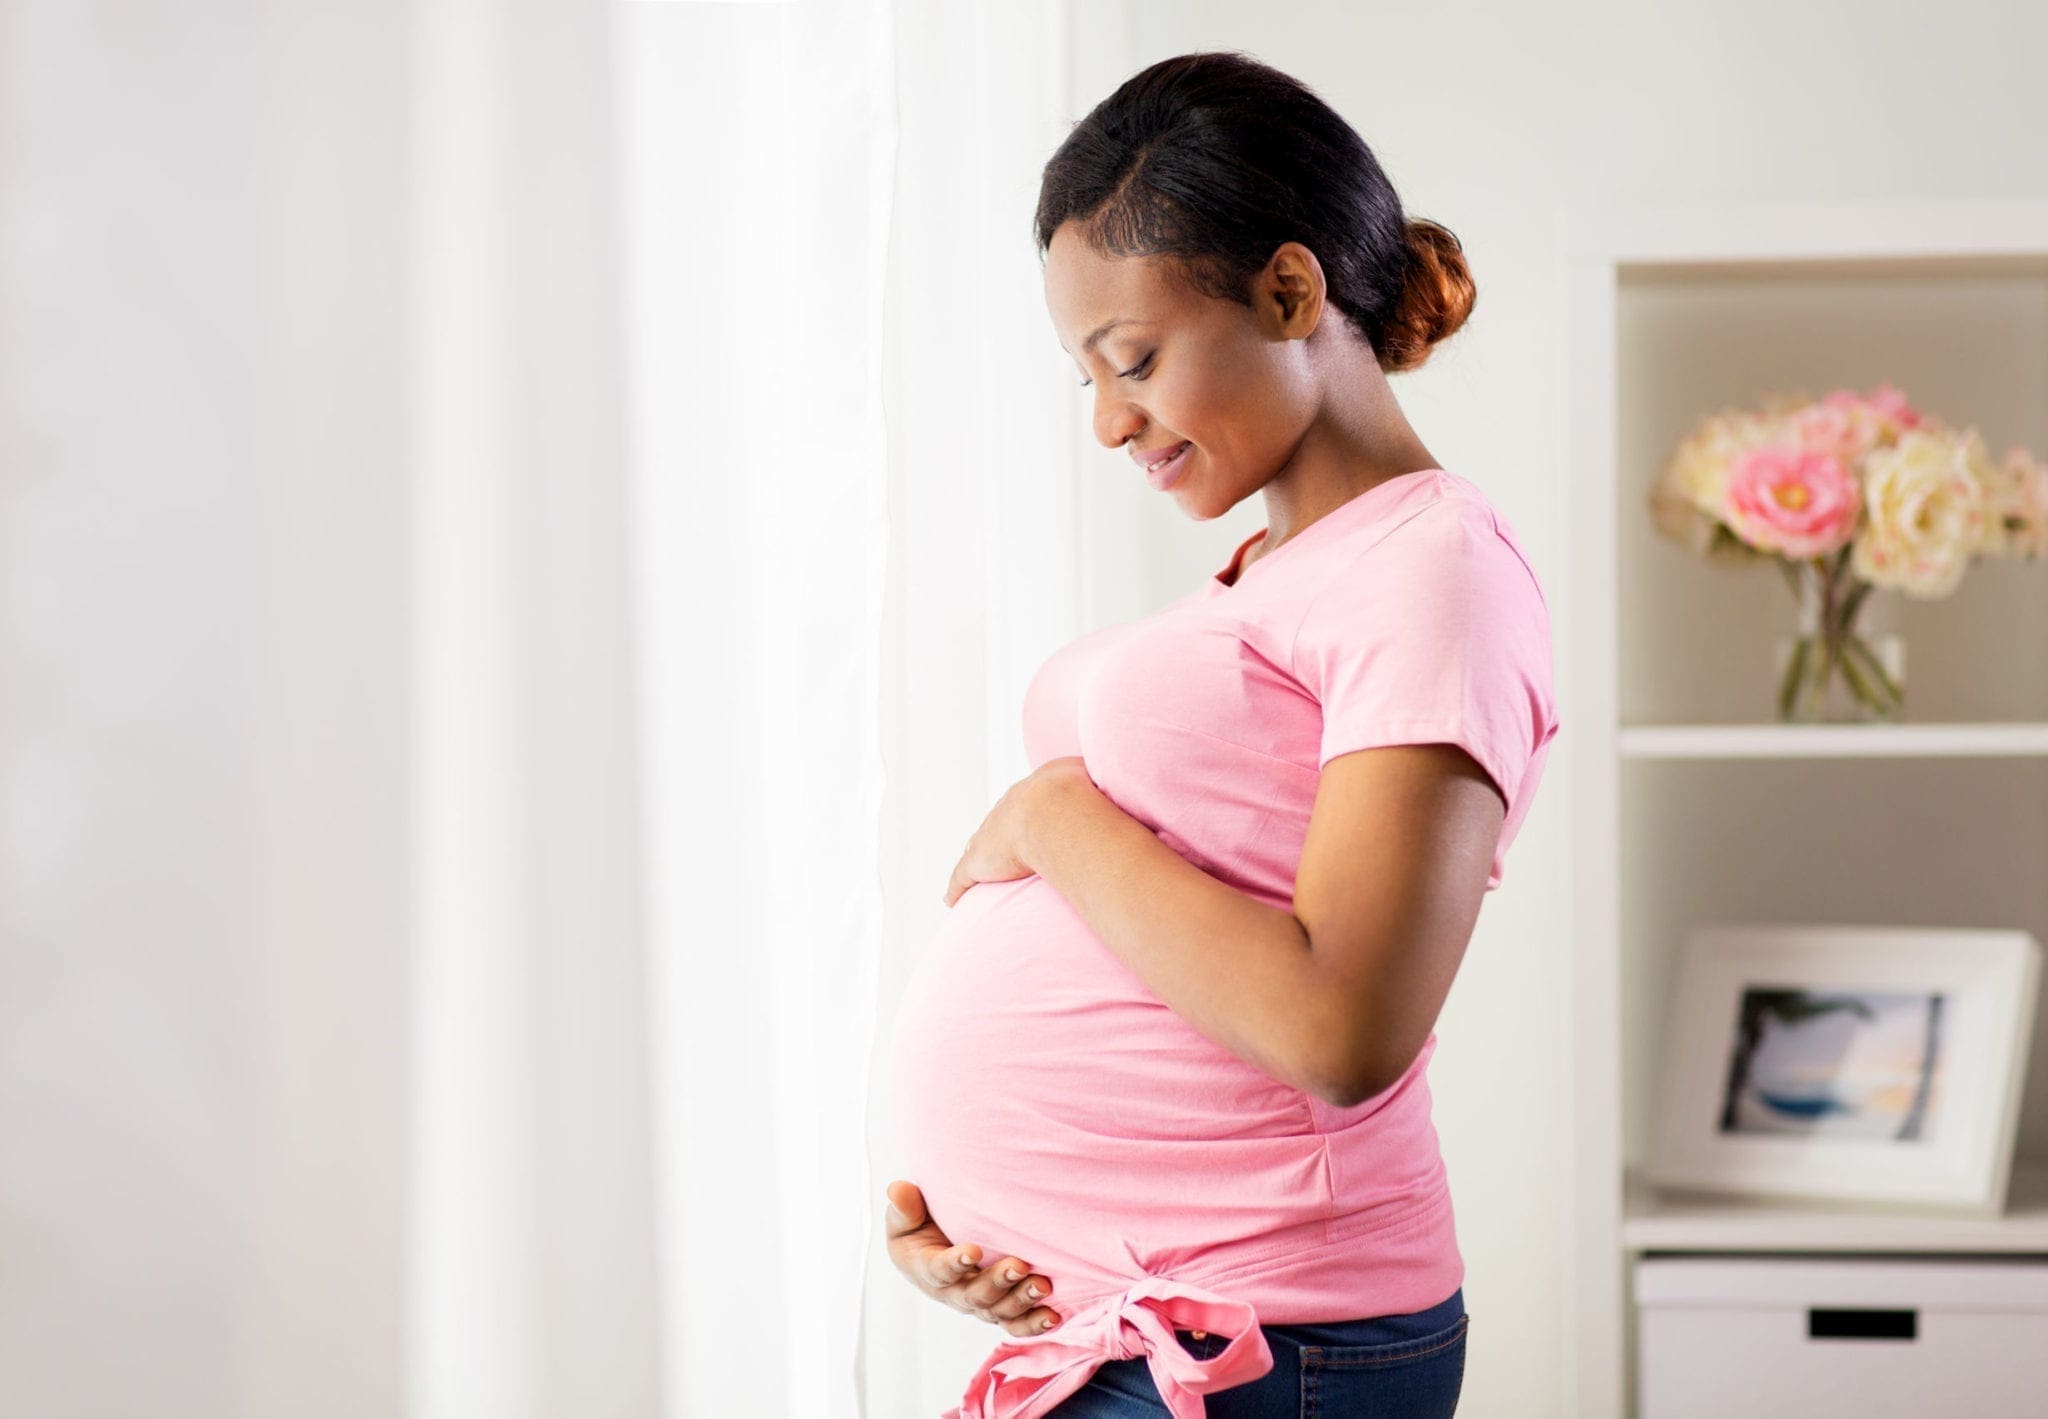 Everything grows during pregnancy, tummy, body weight and also